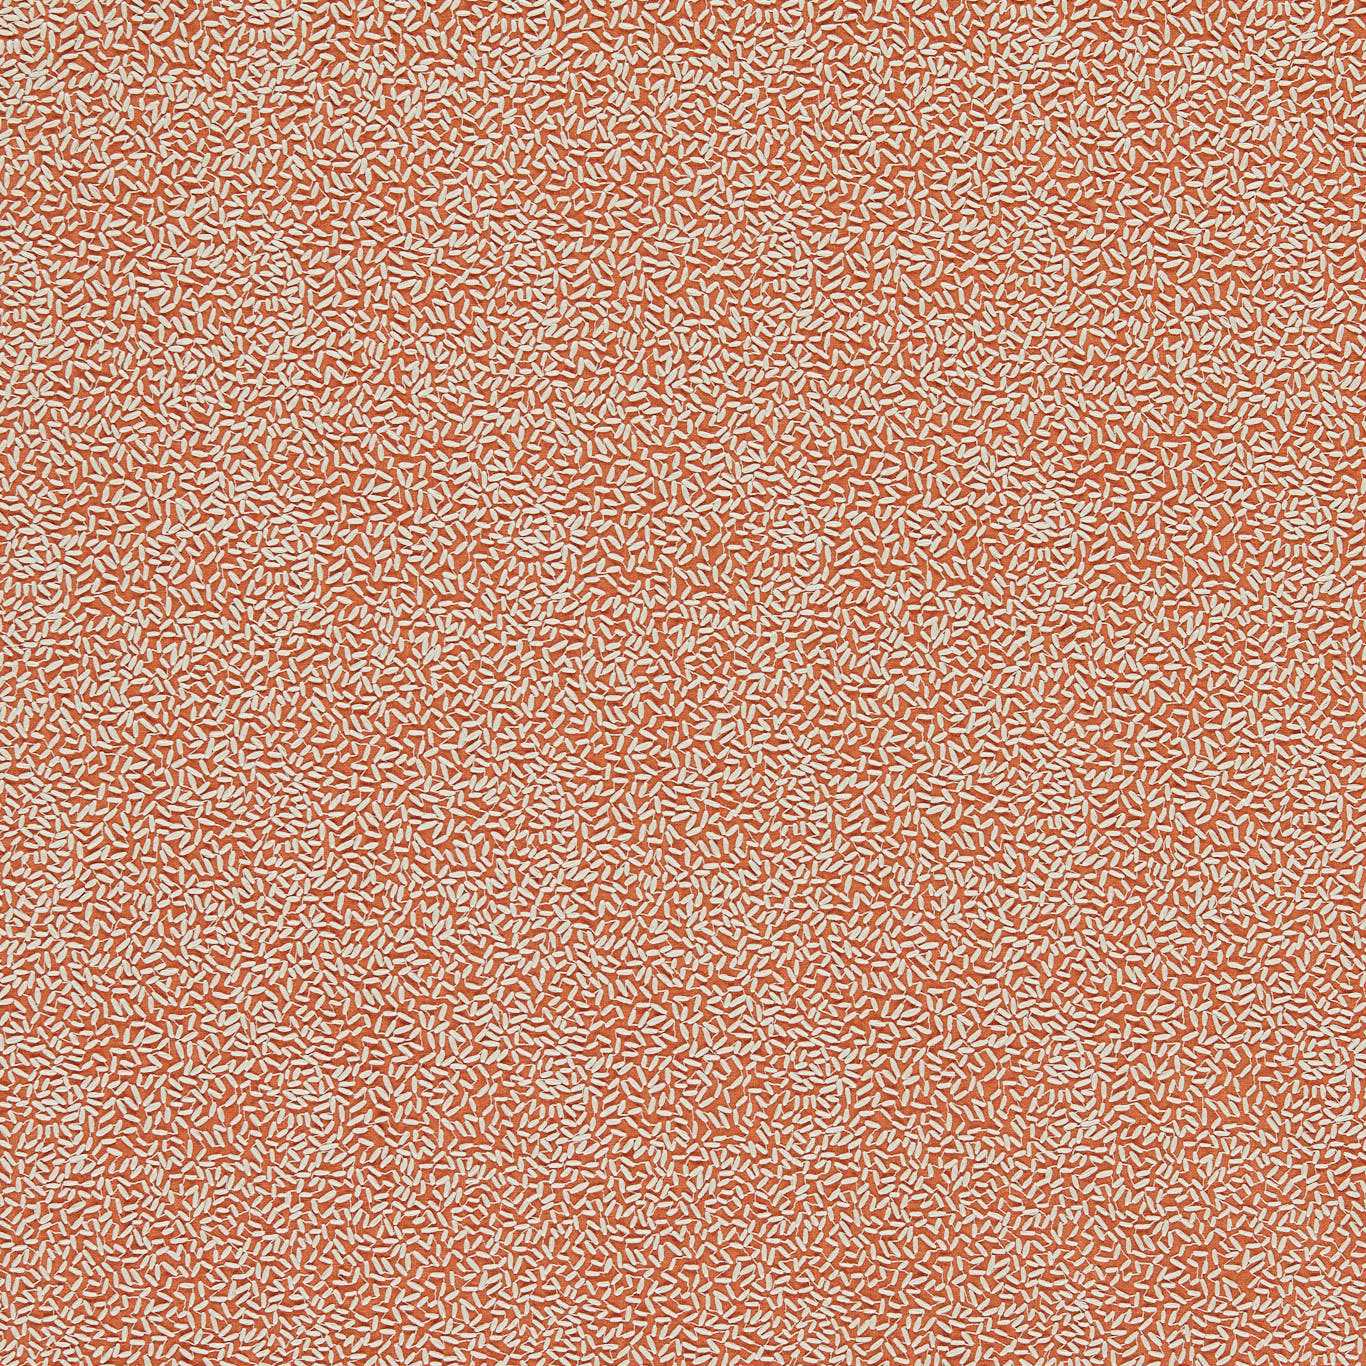 Sow Fabric - Baked Terracotta/Soft Focus